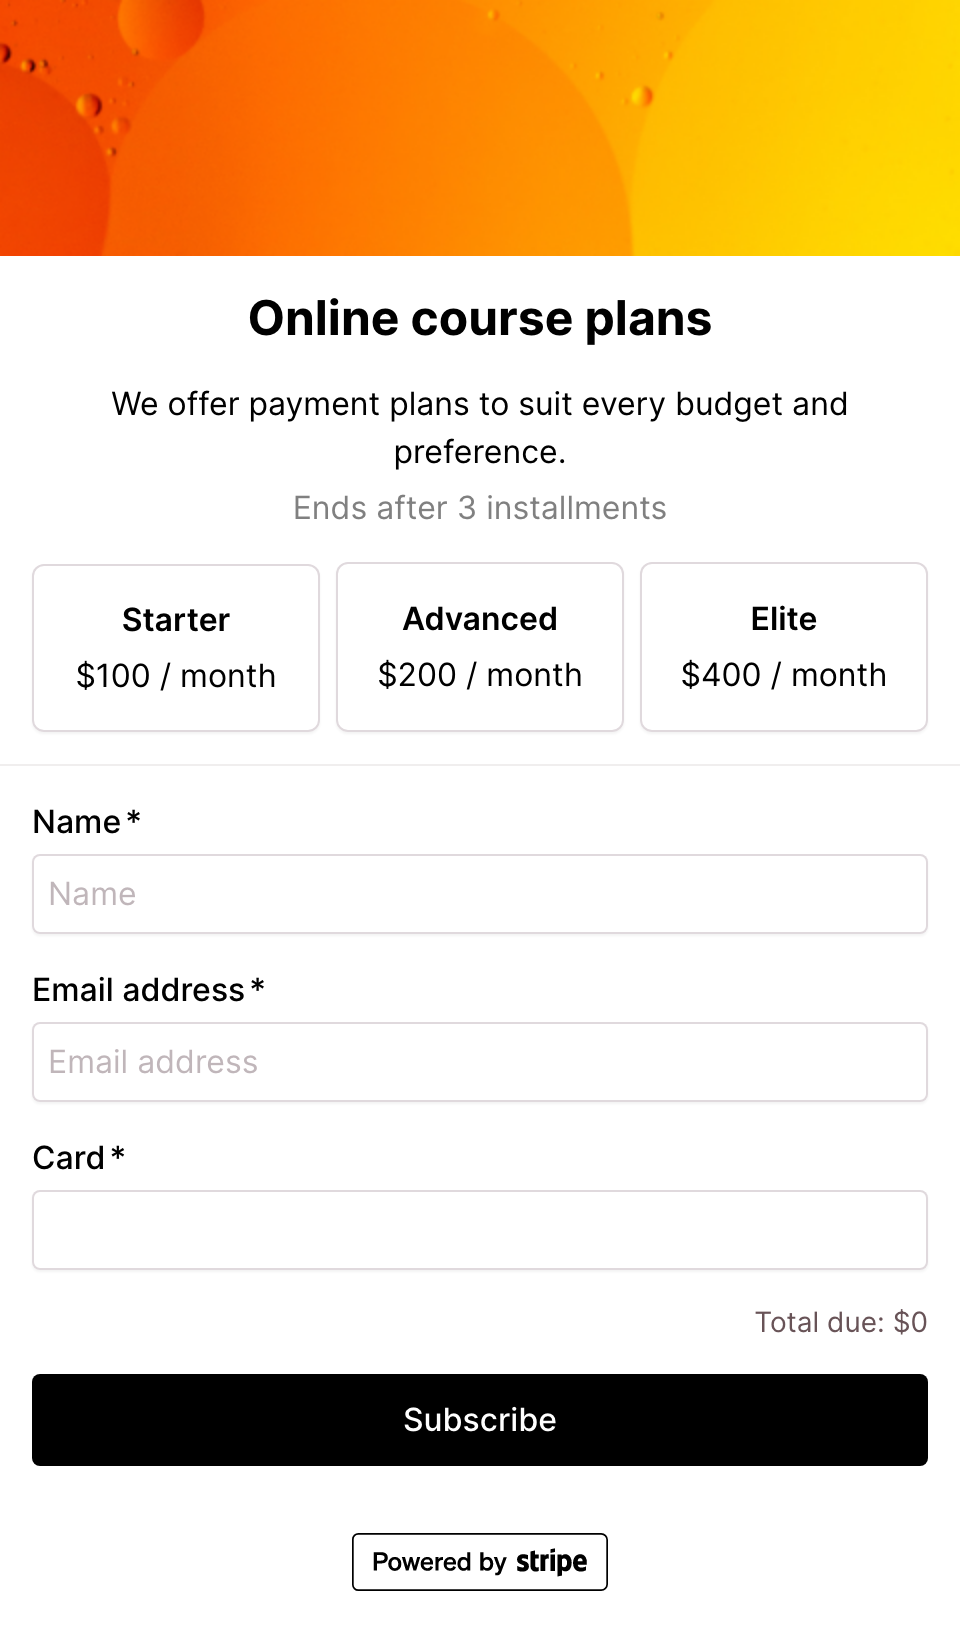 Online course - tiered pricing - payment plan